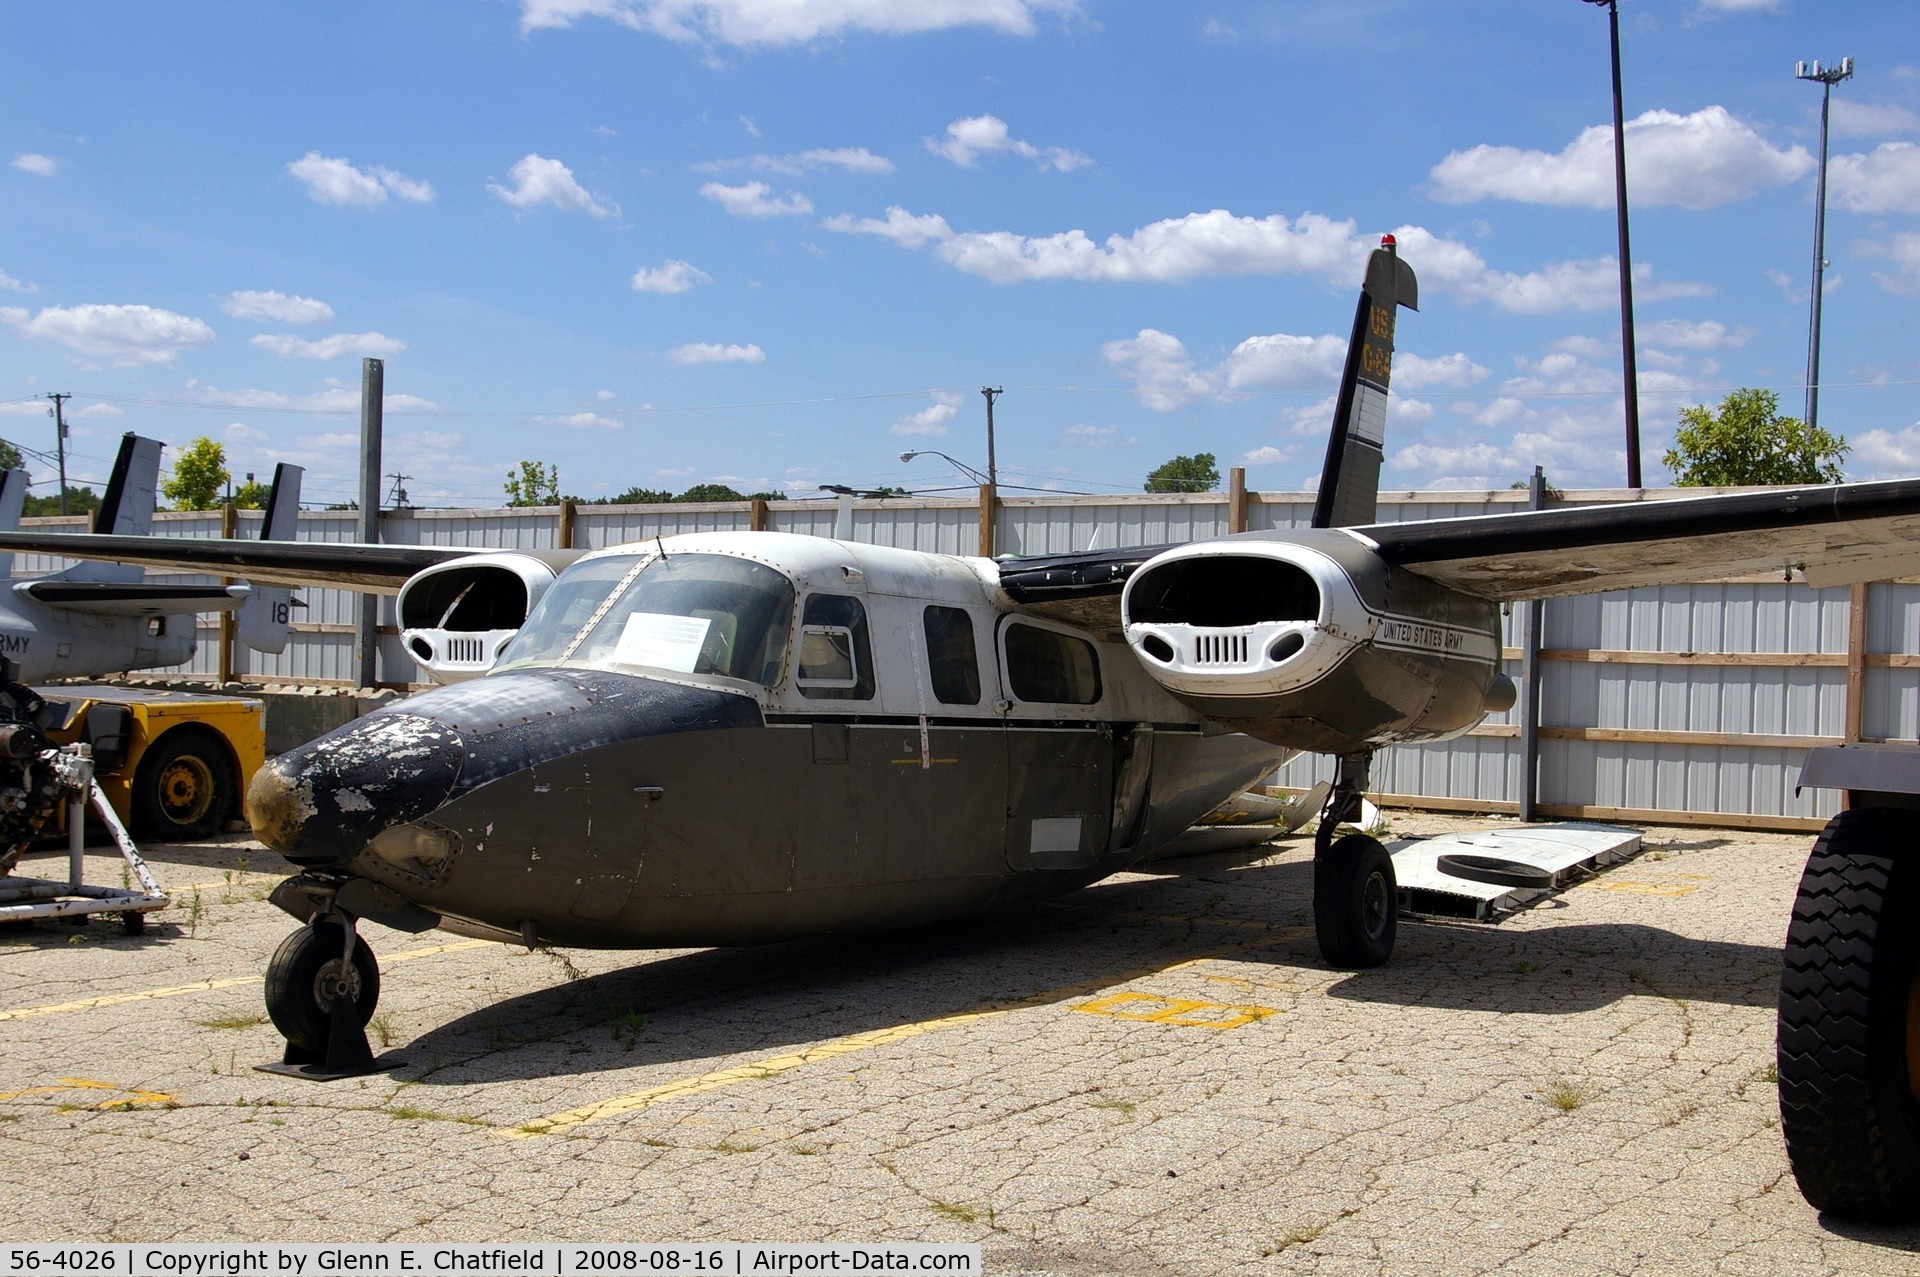 56-4026, 1956 Aero Commander U-9C (L-26C) C/N 680-344-36, At the Russell Military Museum, Russell, IL